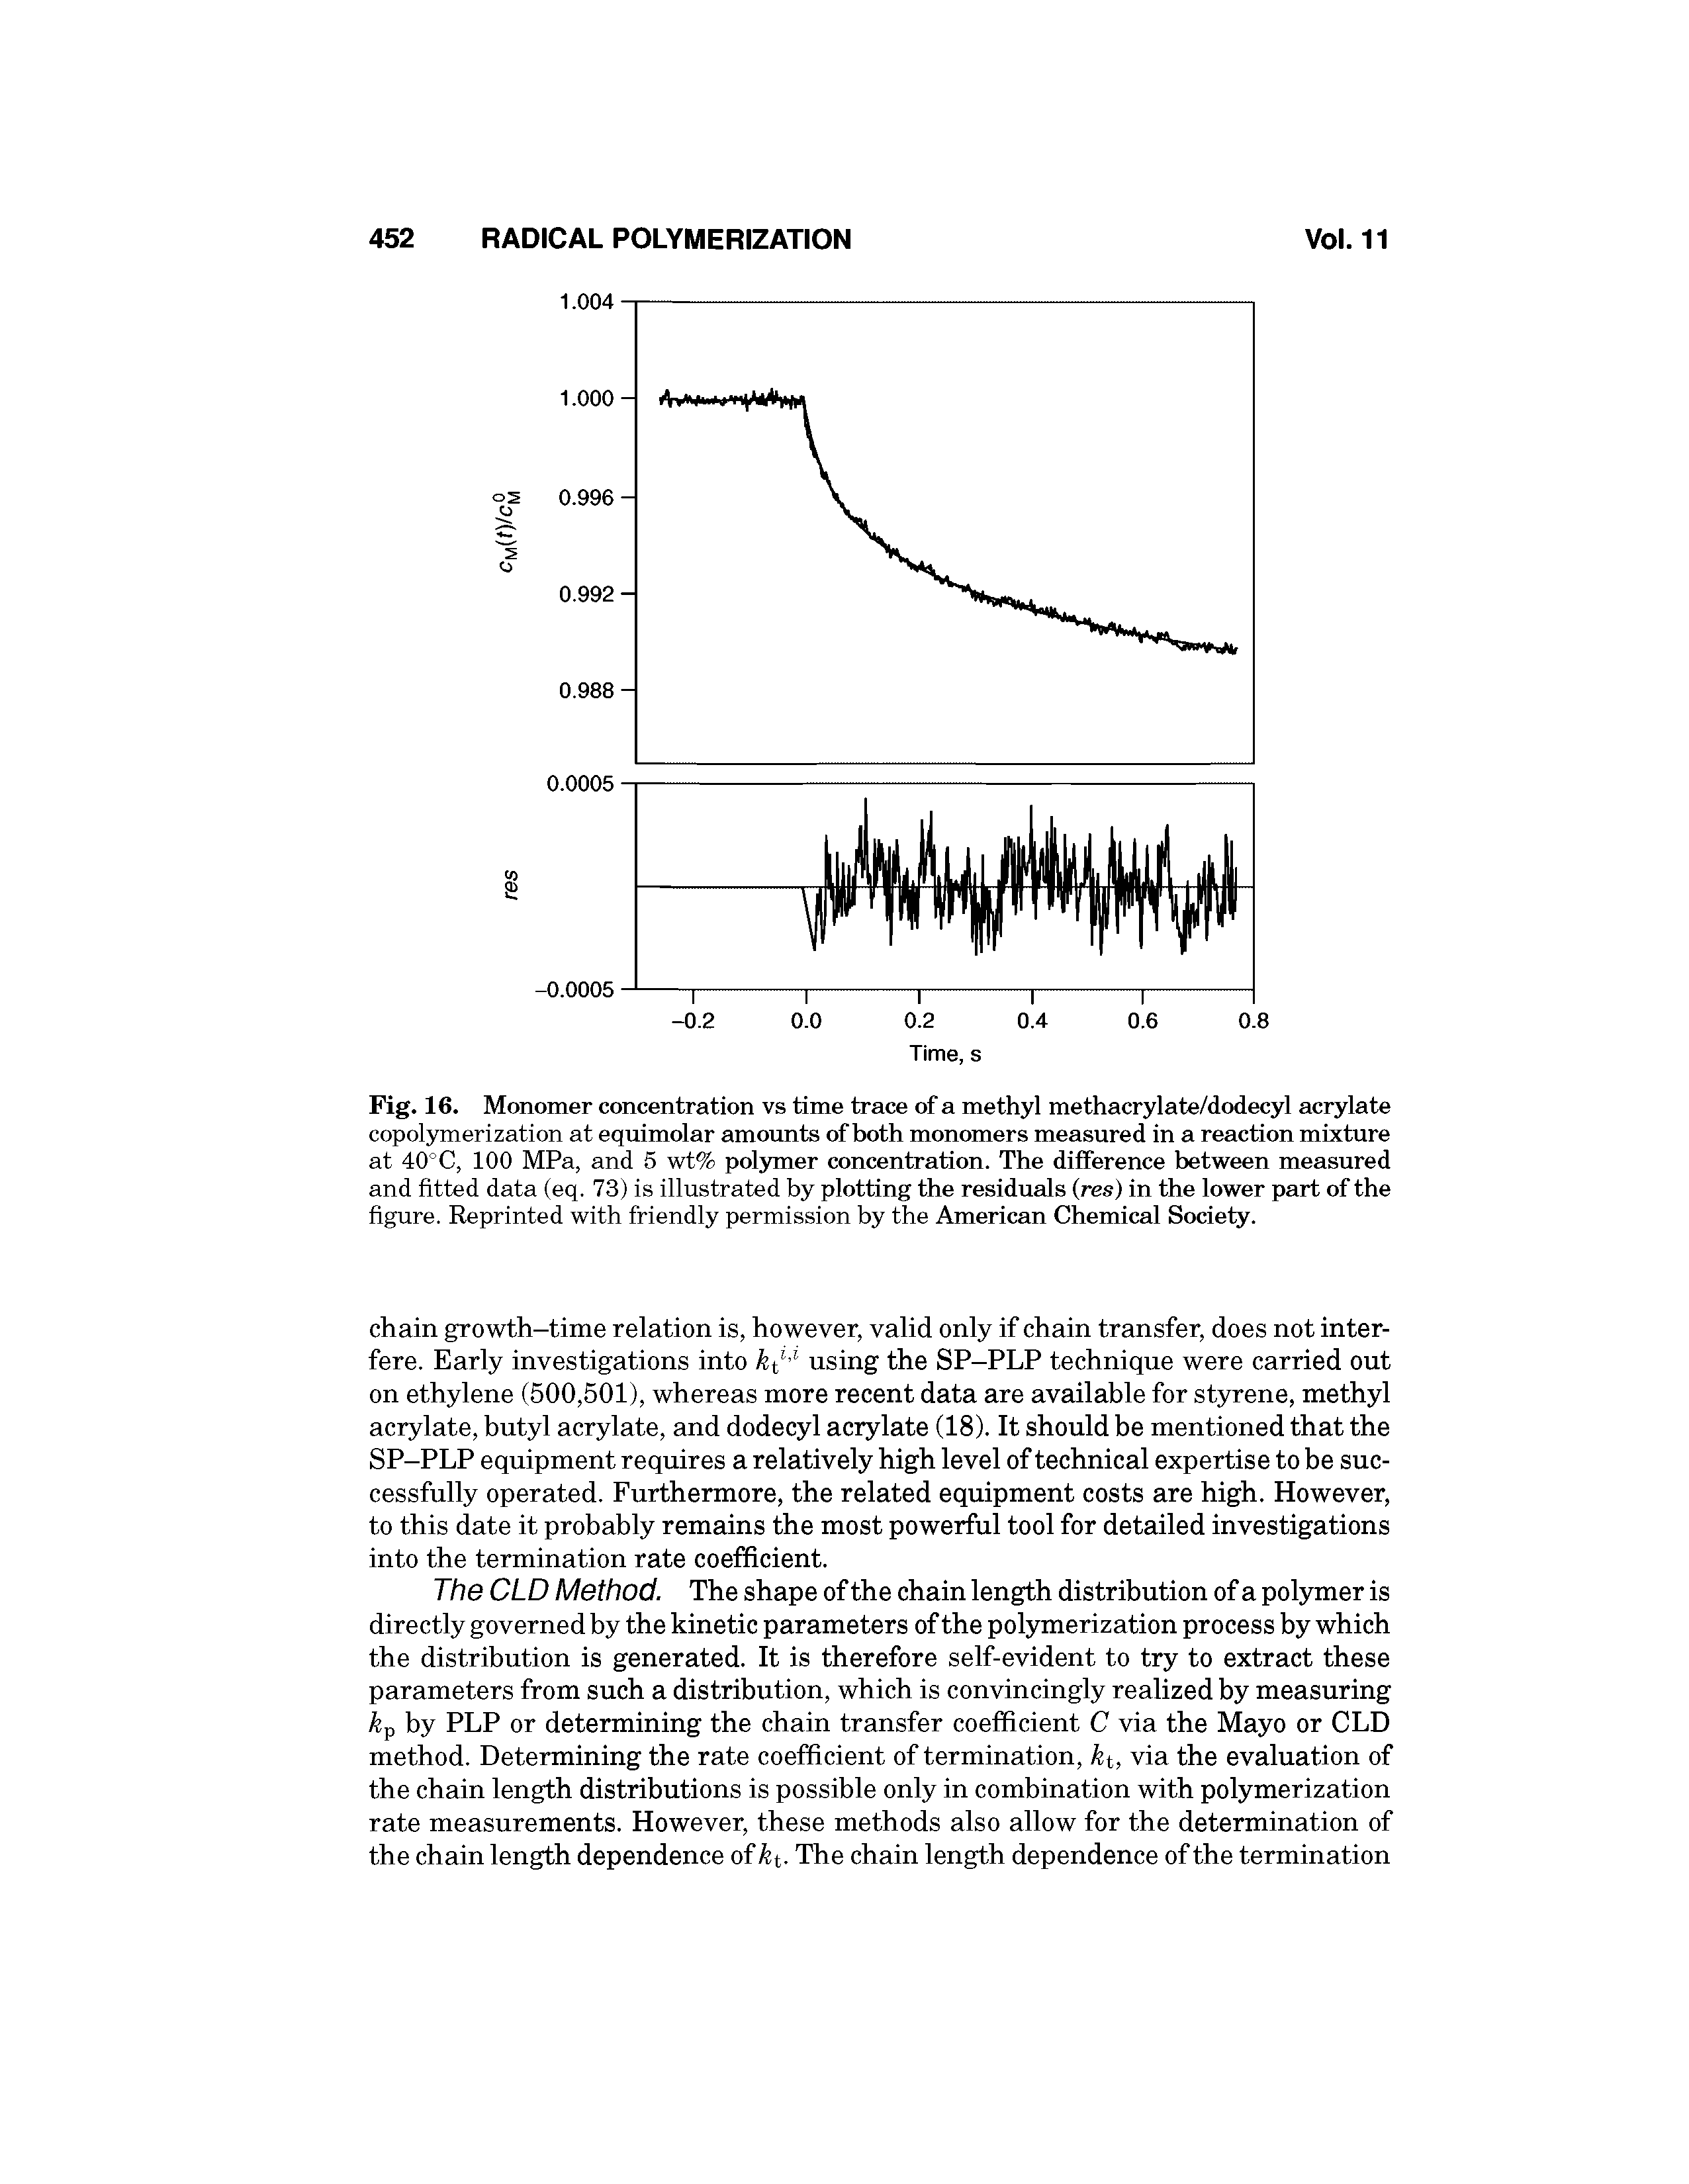 Fig. 16. Monomer concentration vs time trace of a methyl methacrylate/dodecyl acrylate copolymerization at equimolar amounts of both monomers measured in a reaction mixture at 40°C, 100 MPa, and 5 wt% polymer concentration. The difference between measured and fitted data (eq. 73) is illustrated by plotting the residuals (res) in the lower part of the figure. Reprinted with friendly permission by the American Chemical Society.